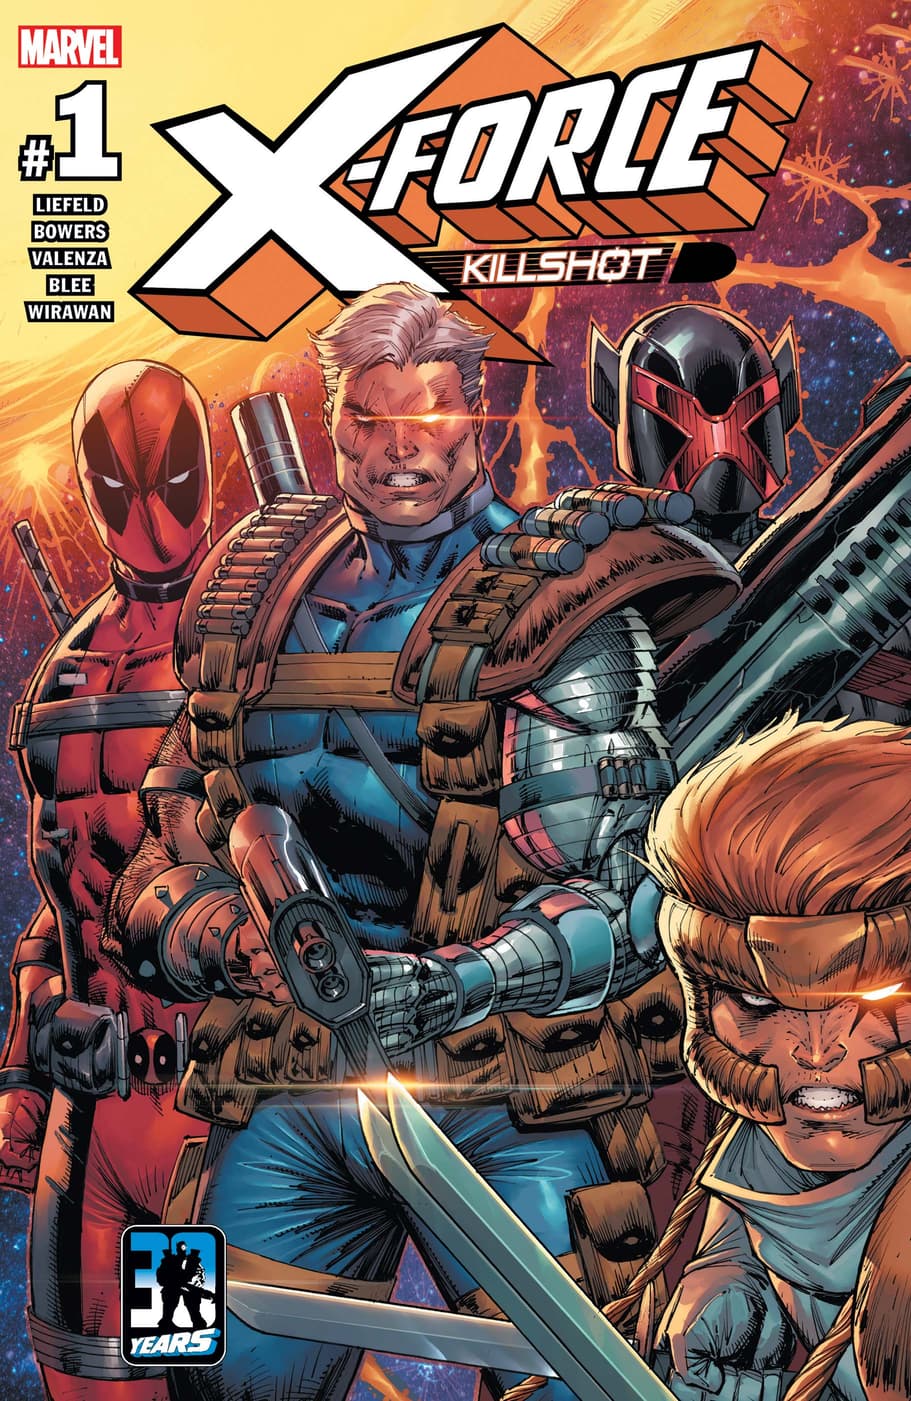 X-FORCE: KILLSHOT ANNIVERSARY SPECIAL #1 cover by Rob Liefeld